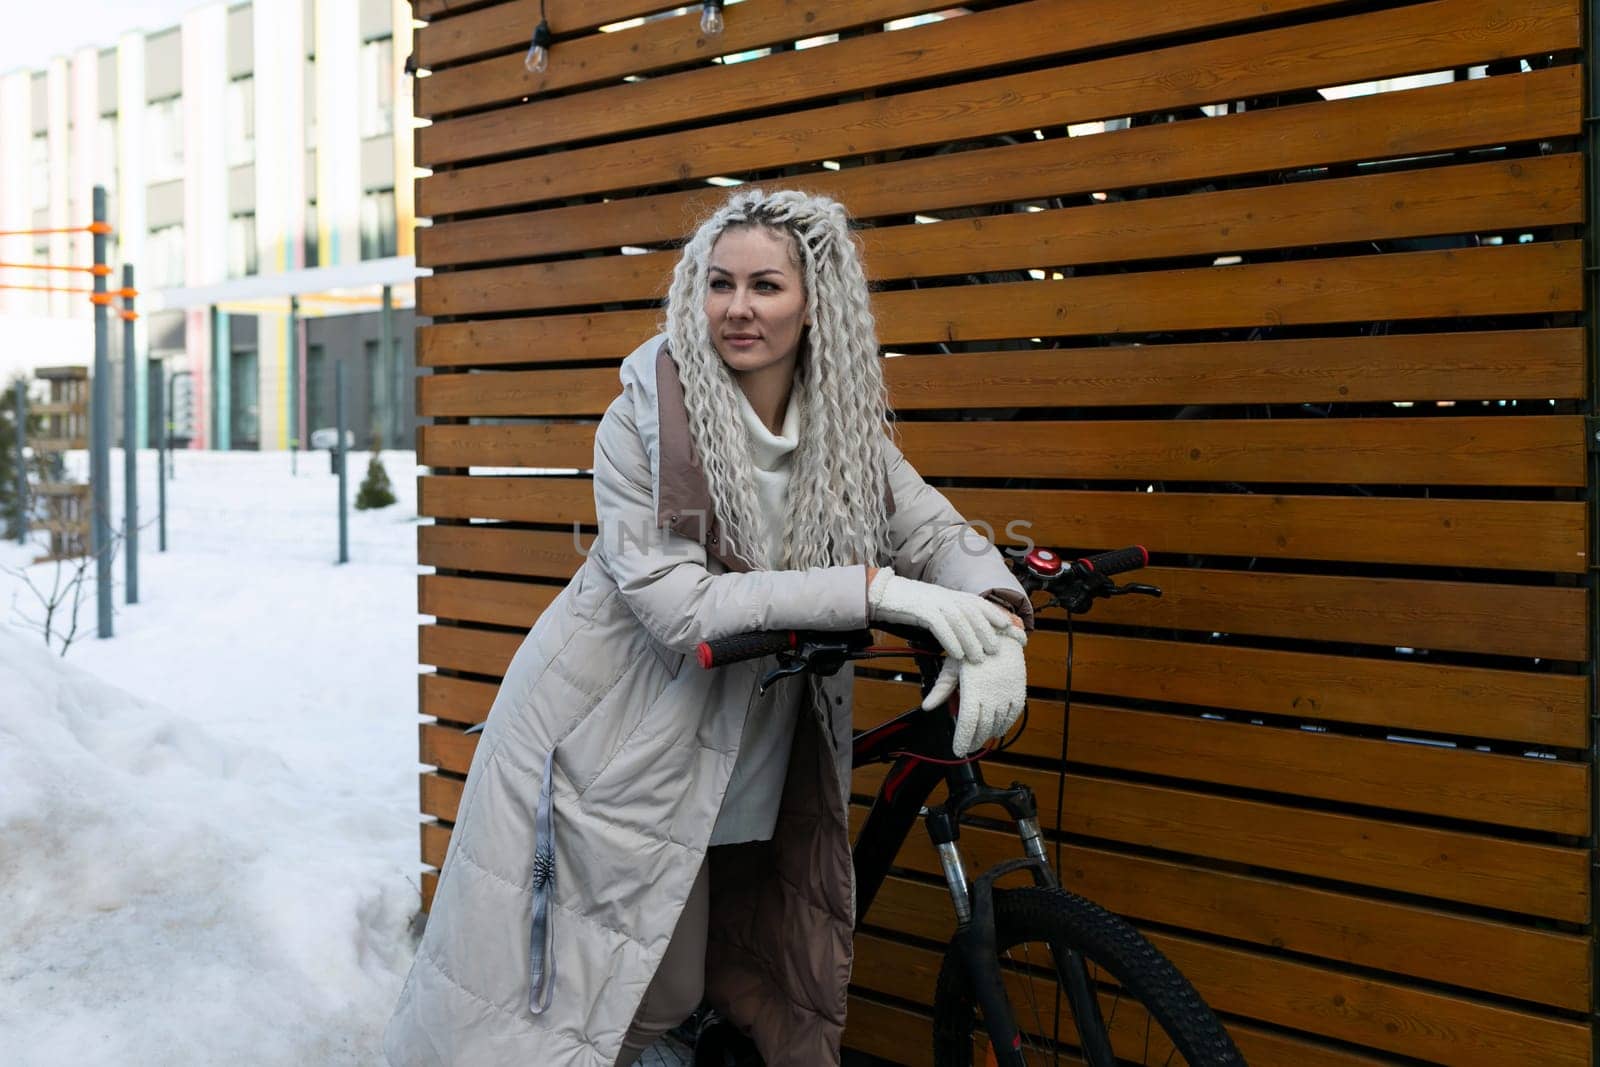 A woman is standing next to a bicycle on a snow-covered ground. She is wearing winter clothing and looking ahead. The bike is parked in a snowy landscape.